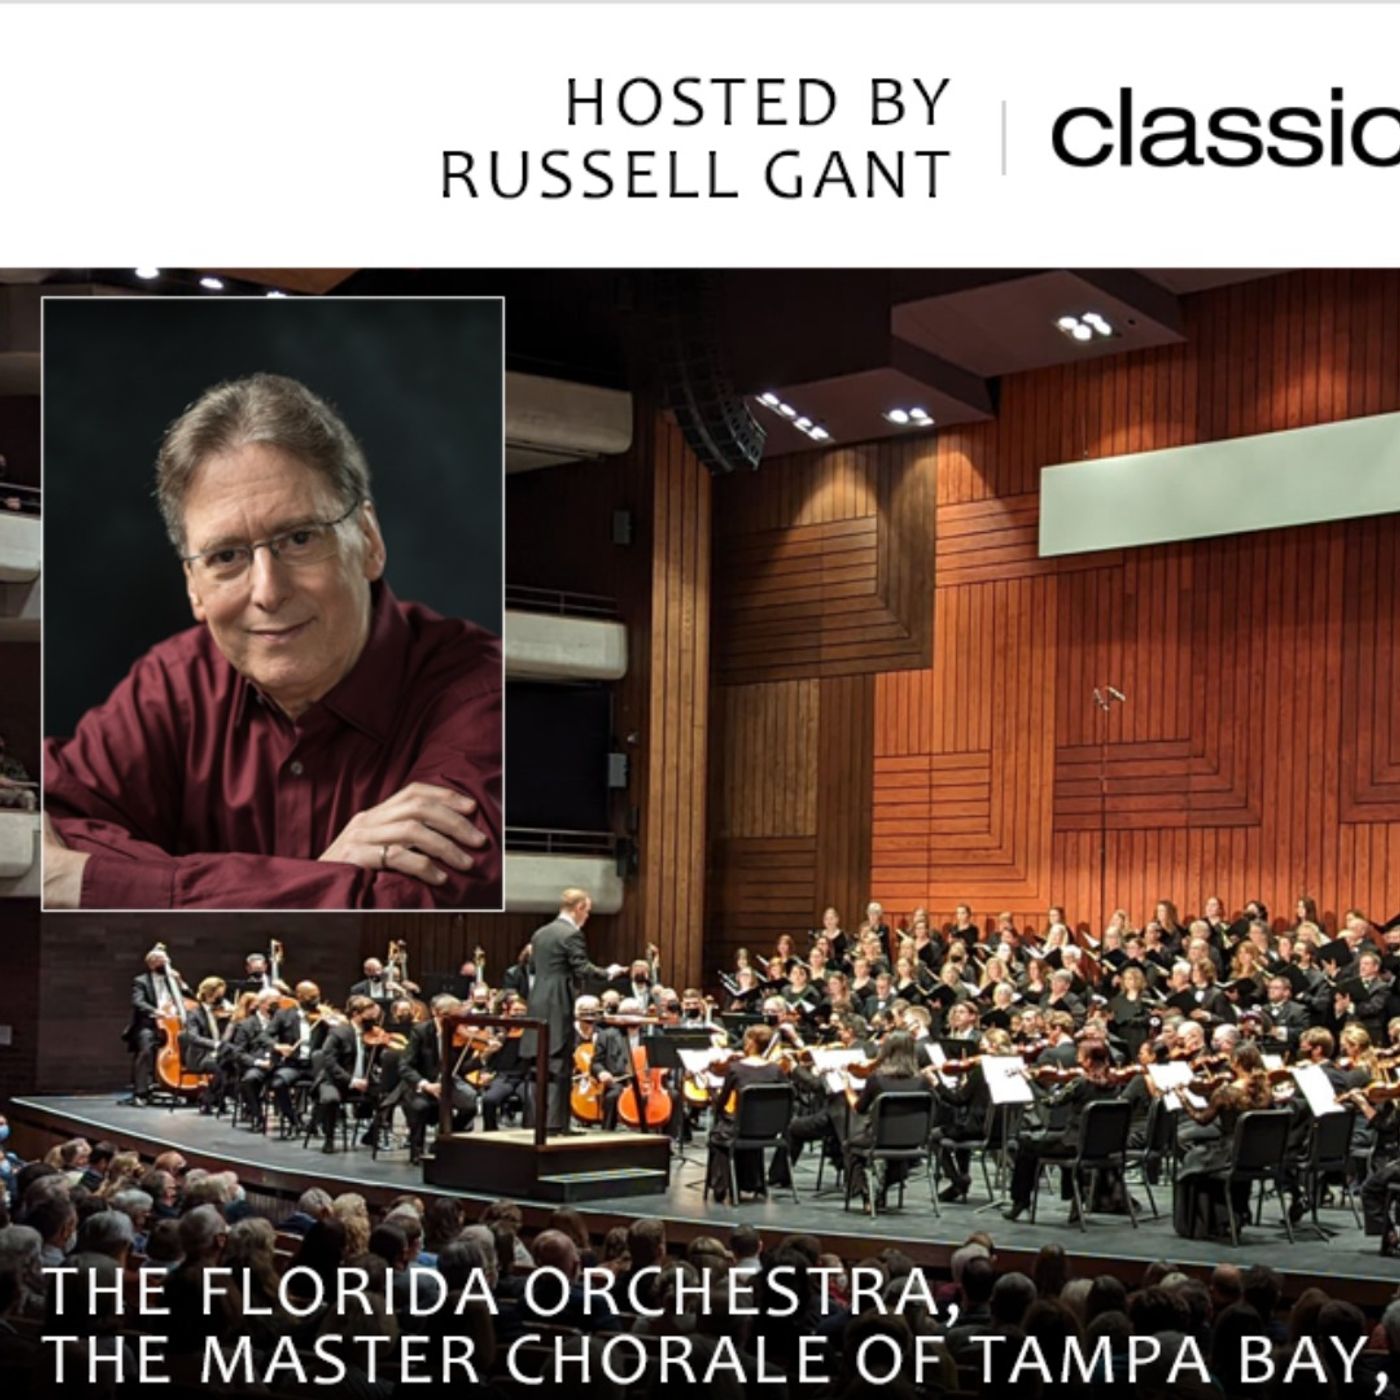 Our Tuesday Concert with The Florida Orchestra Concert Broadcast - Mozart Requiem for September 27, 2022